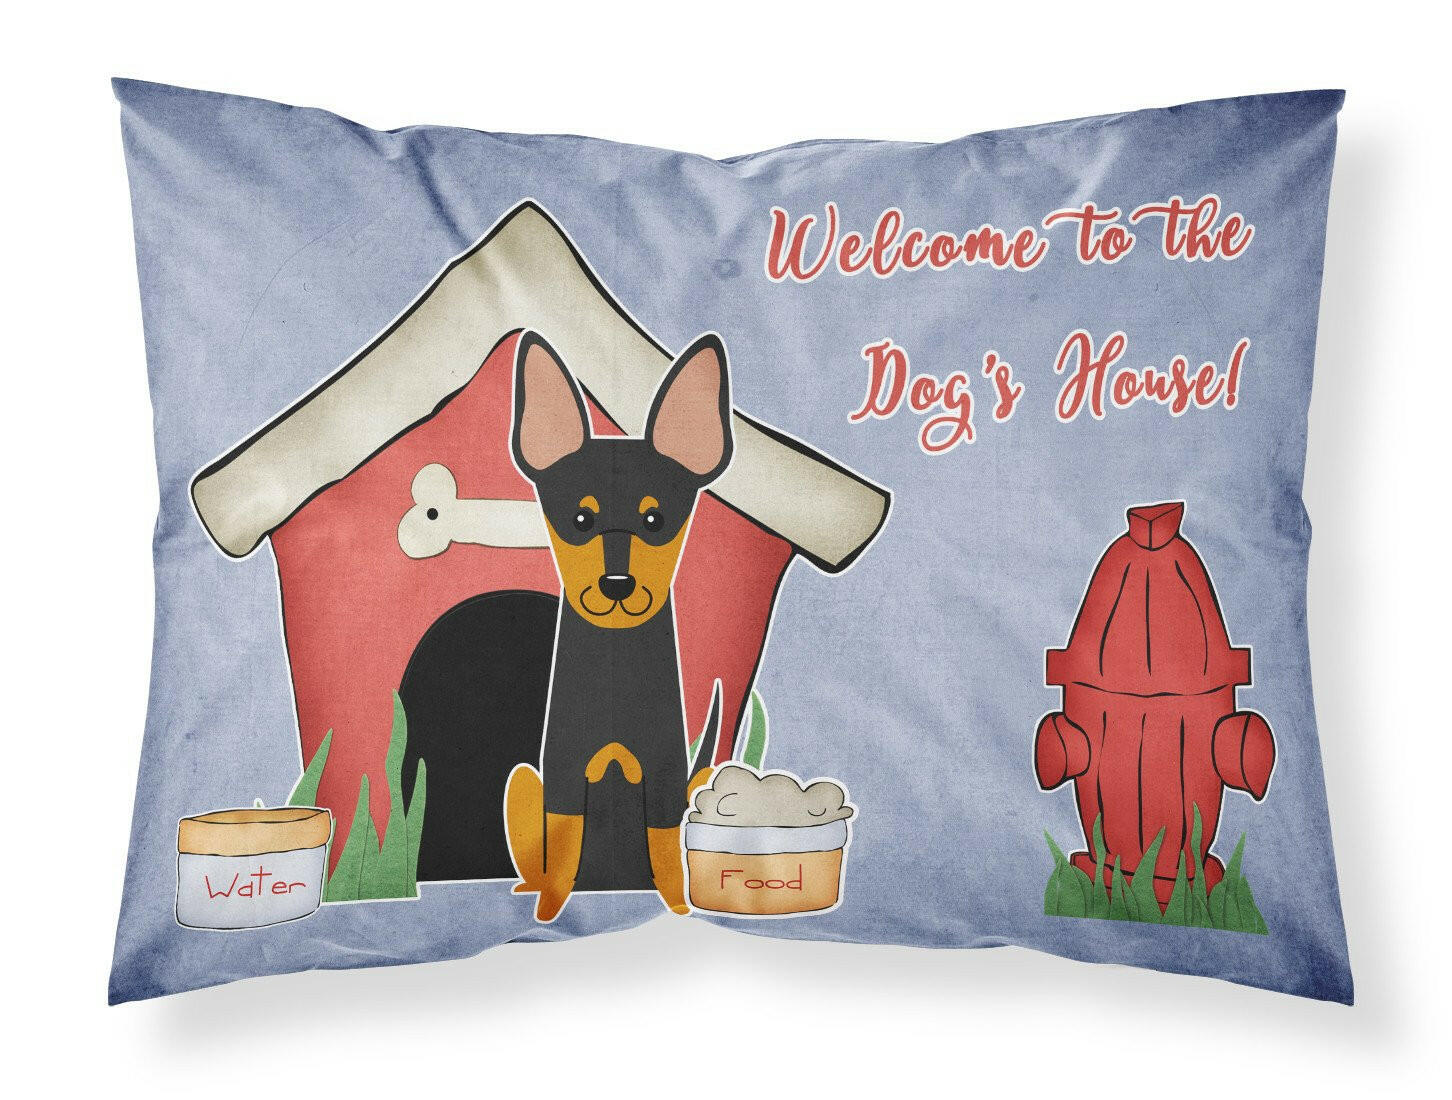 Dog House Collection English Toy Terrier Fabric Standard Pillowcase BB2863PILLOWCASE by Caroline's Treasures